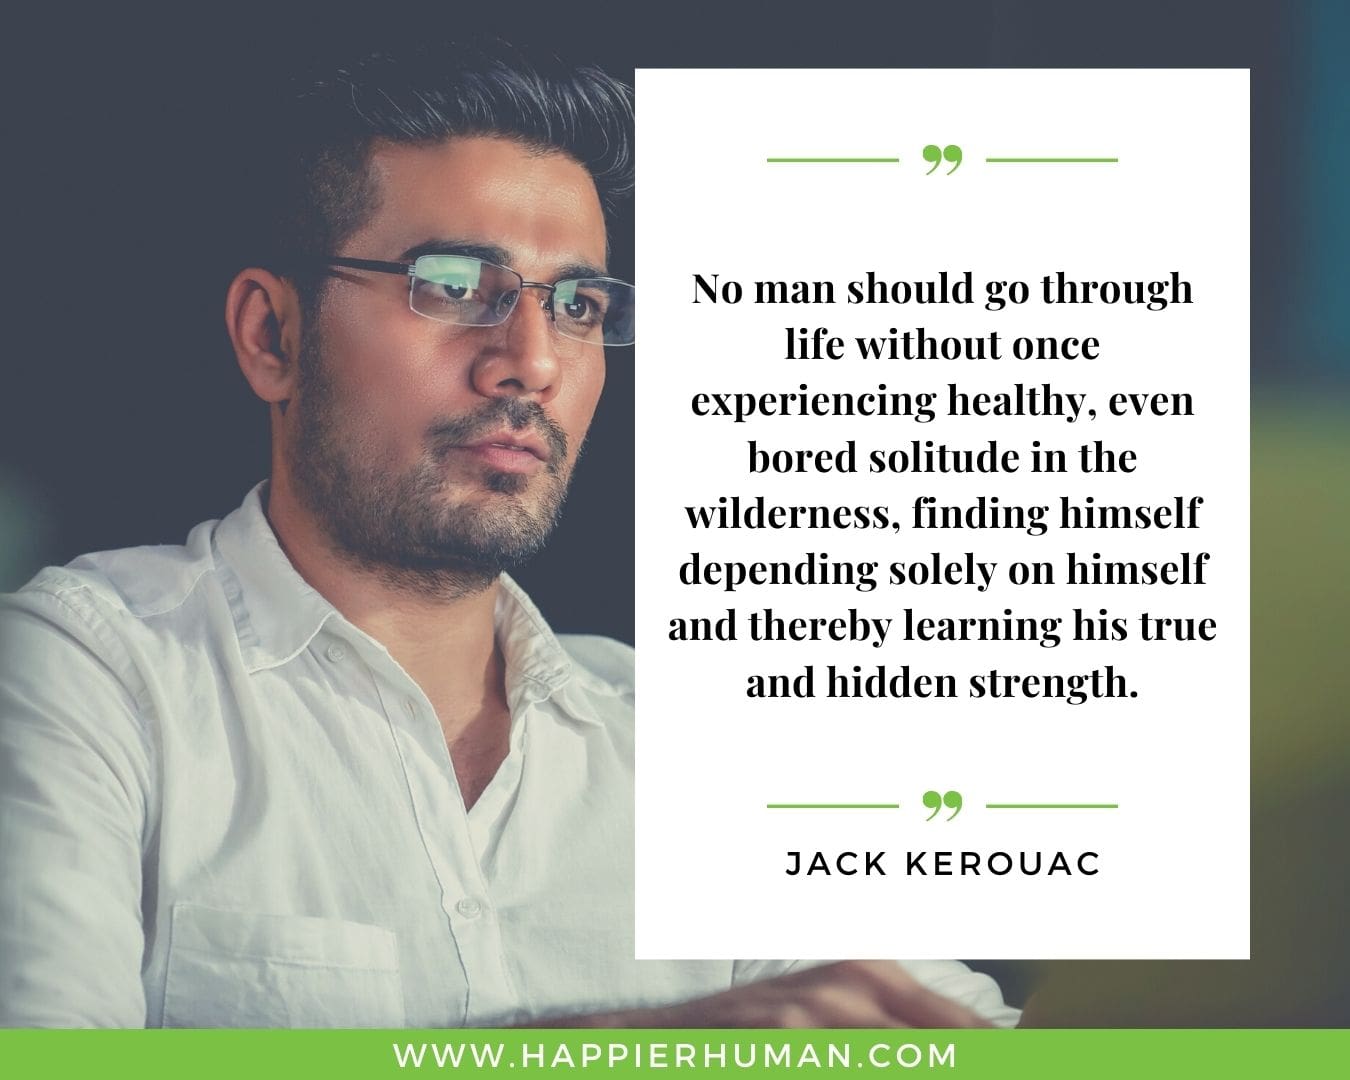 Loneliness Quotes - “No man should go through life without once experiencing healthy, even bored solitude in the wilderness, finding himself depending solely on himself and thereby learning his true and hidden strength.” – Jack Kerouac